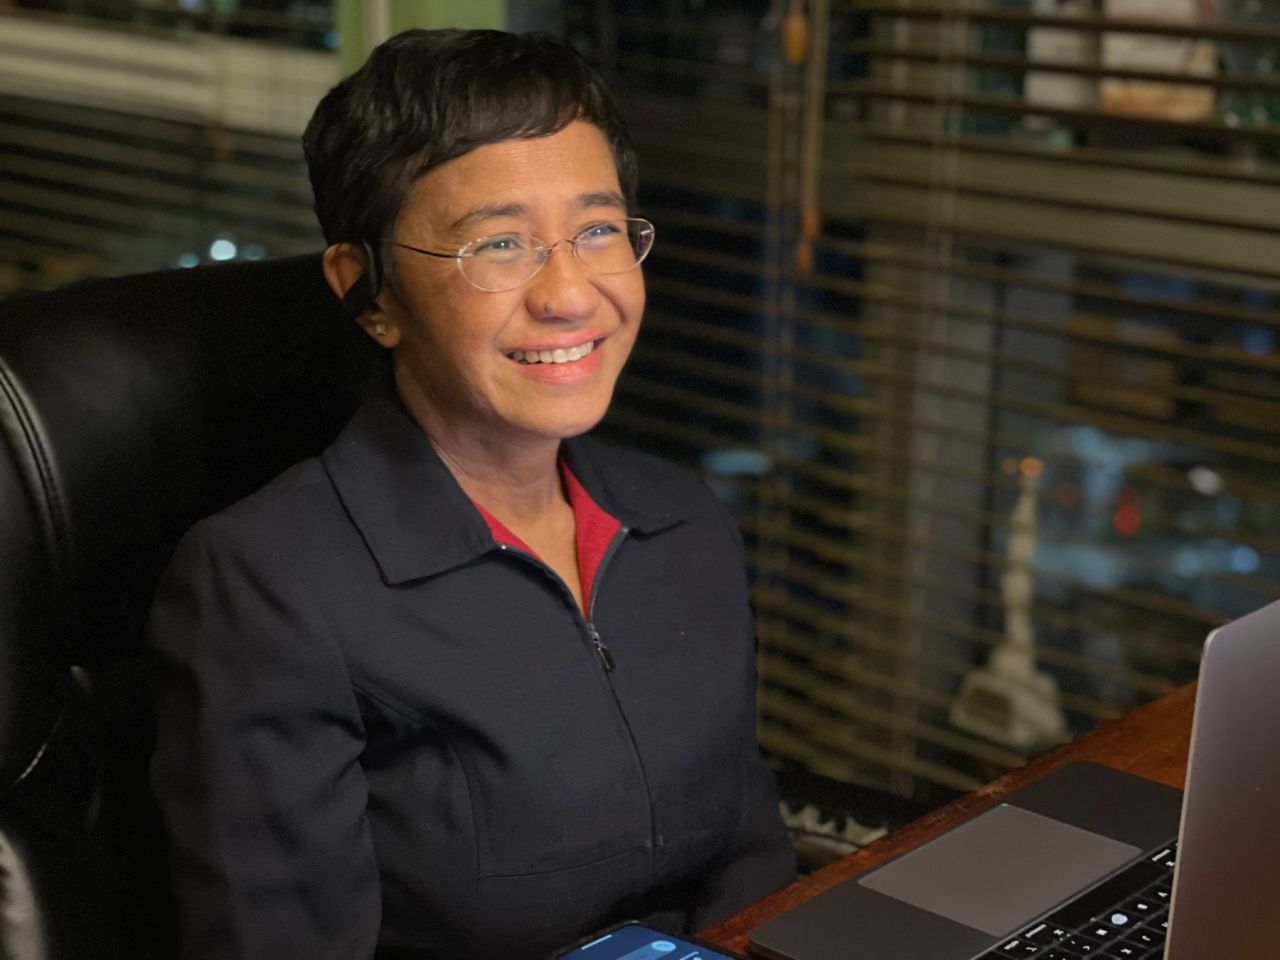 In this photo provided by Rappler, CEO and Executive Editor Maria Ressa reacts after hearing of her winning the Nobel Peace Prize inside her home in Metro Manila, Philippines on October 8, 2021.